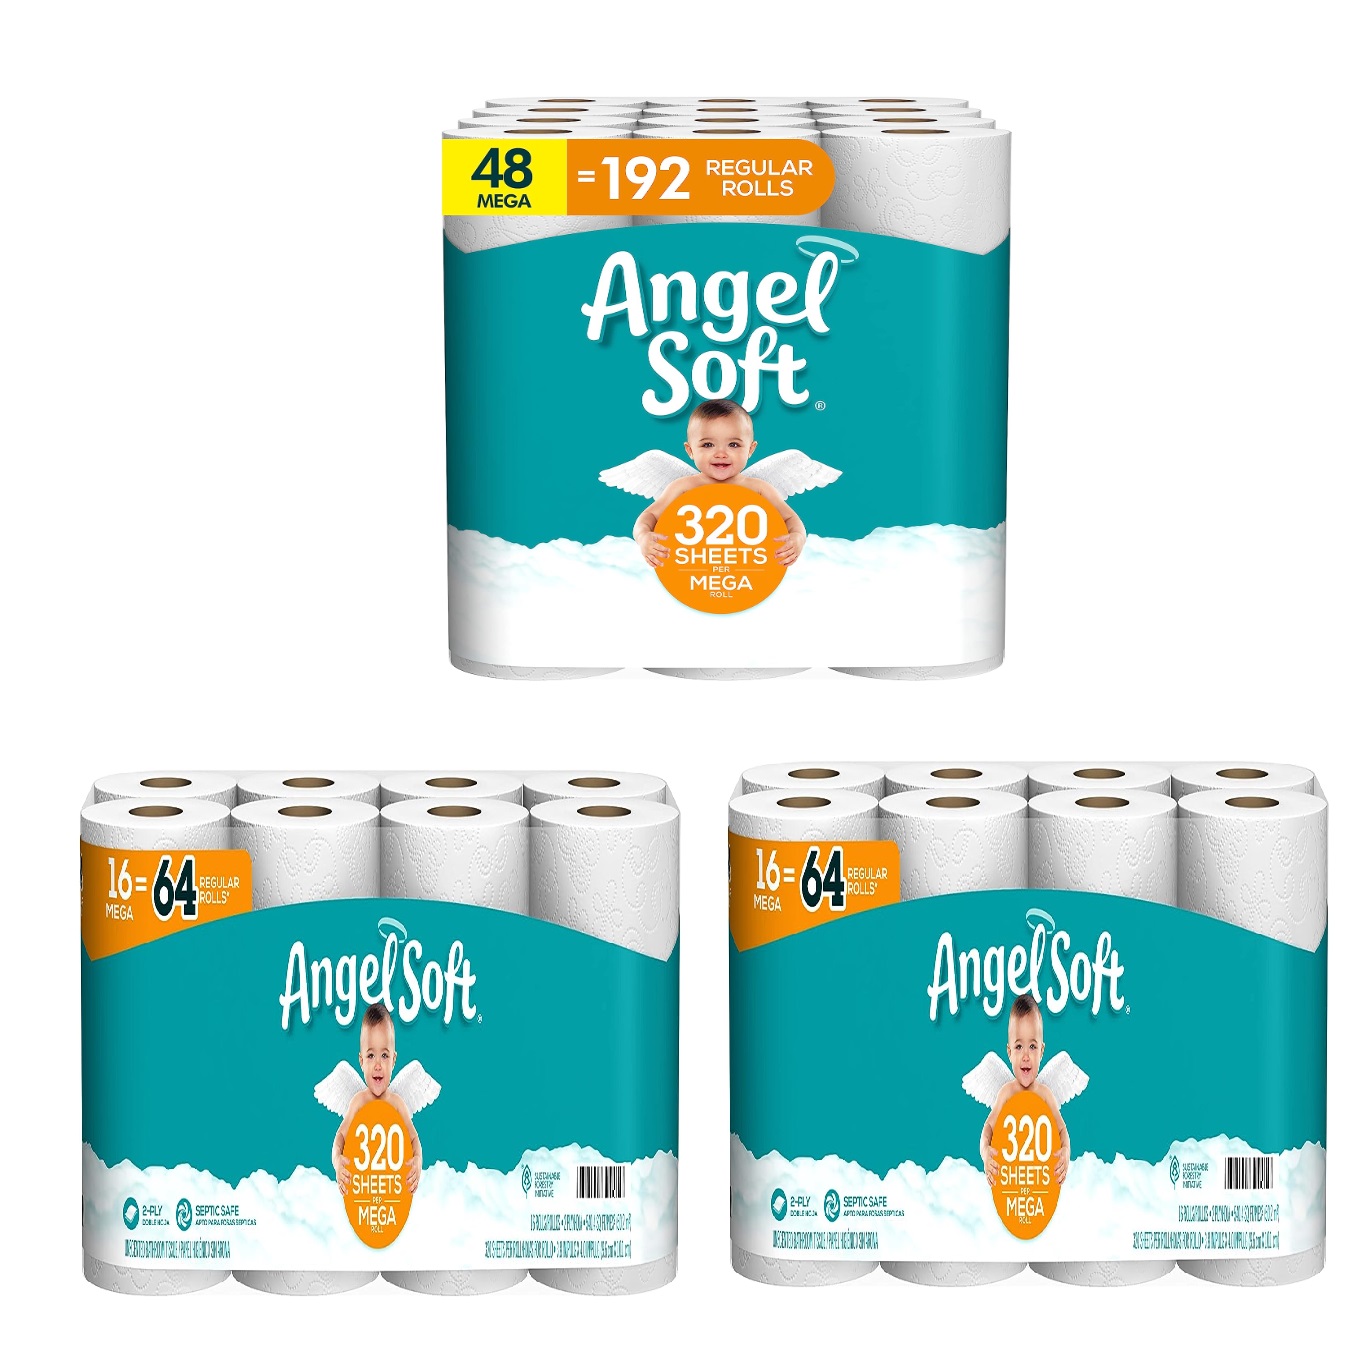 80-Count Angel Soft 2-Ply Mega Rolls Toilet Paper $39.12 & More + Free shipping